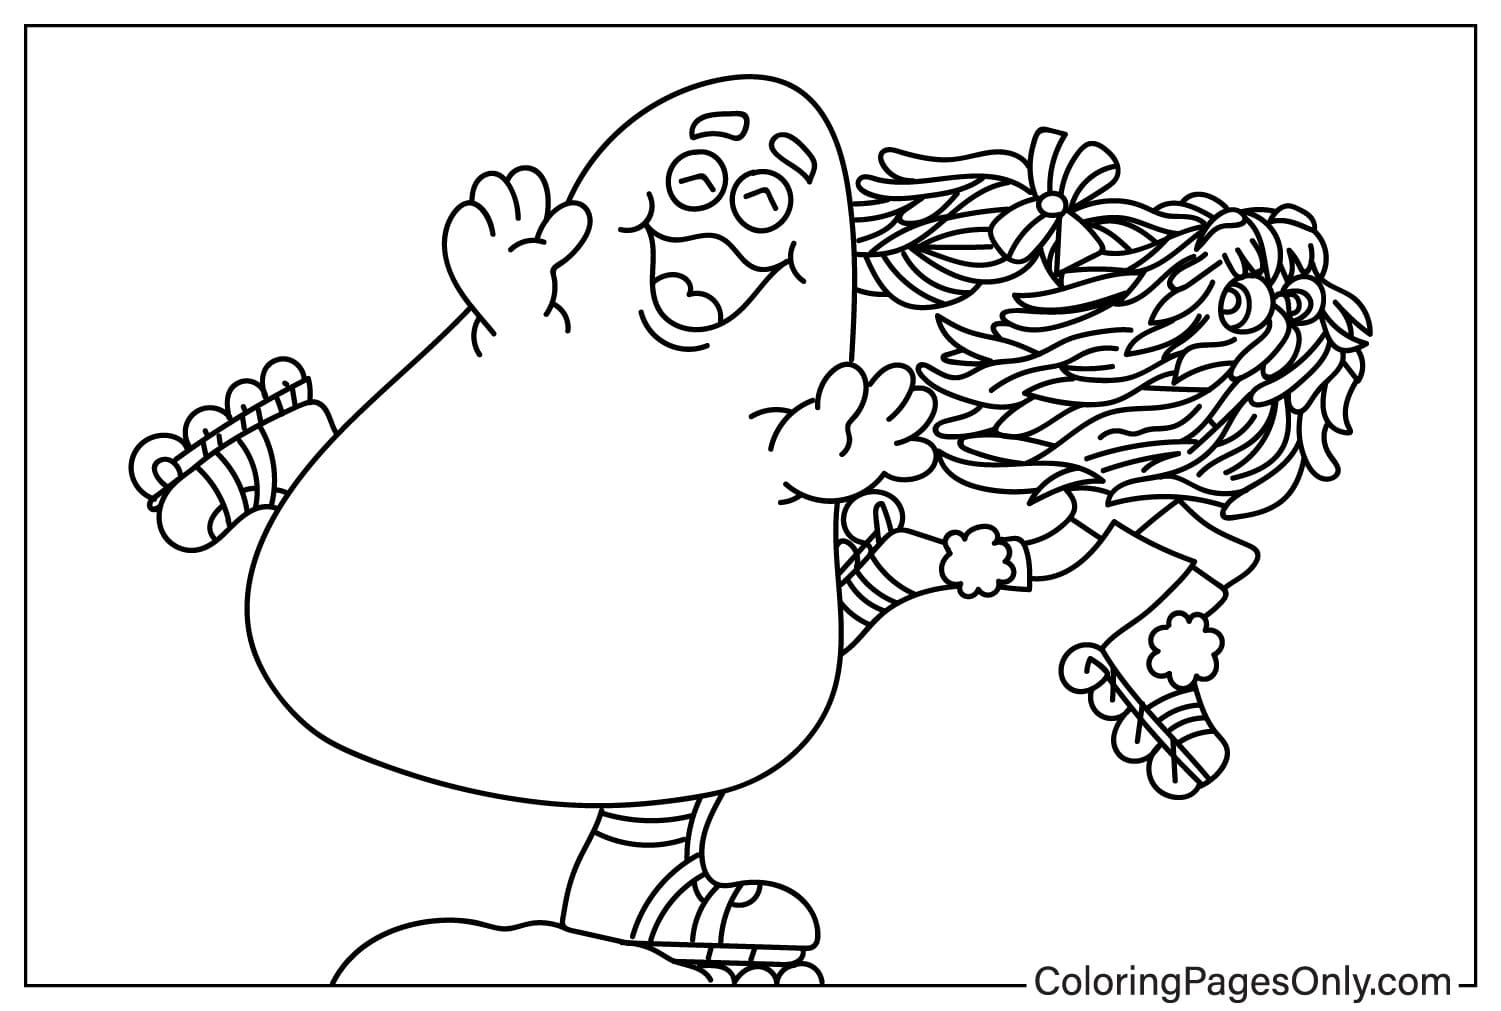 McDonald’s ‘Grimace’s Birthday’ Campaign to Color from Grimace